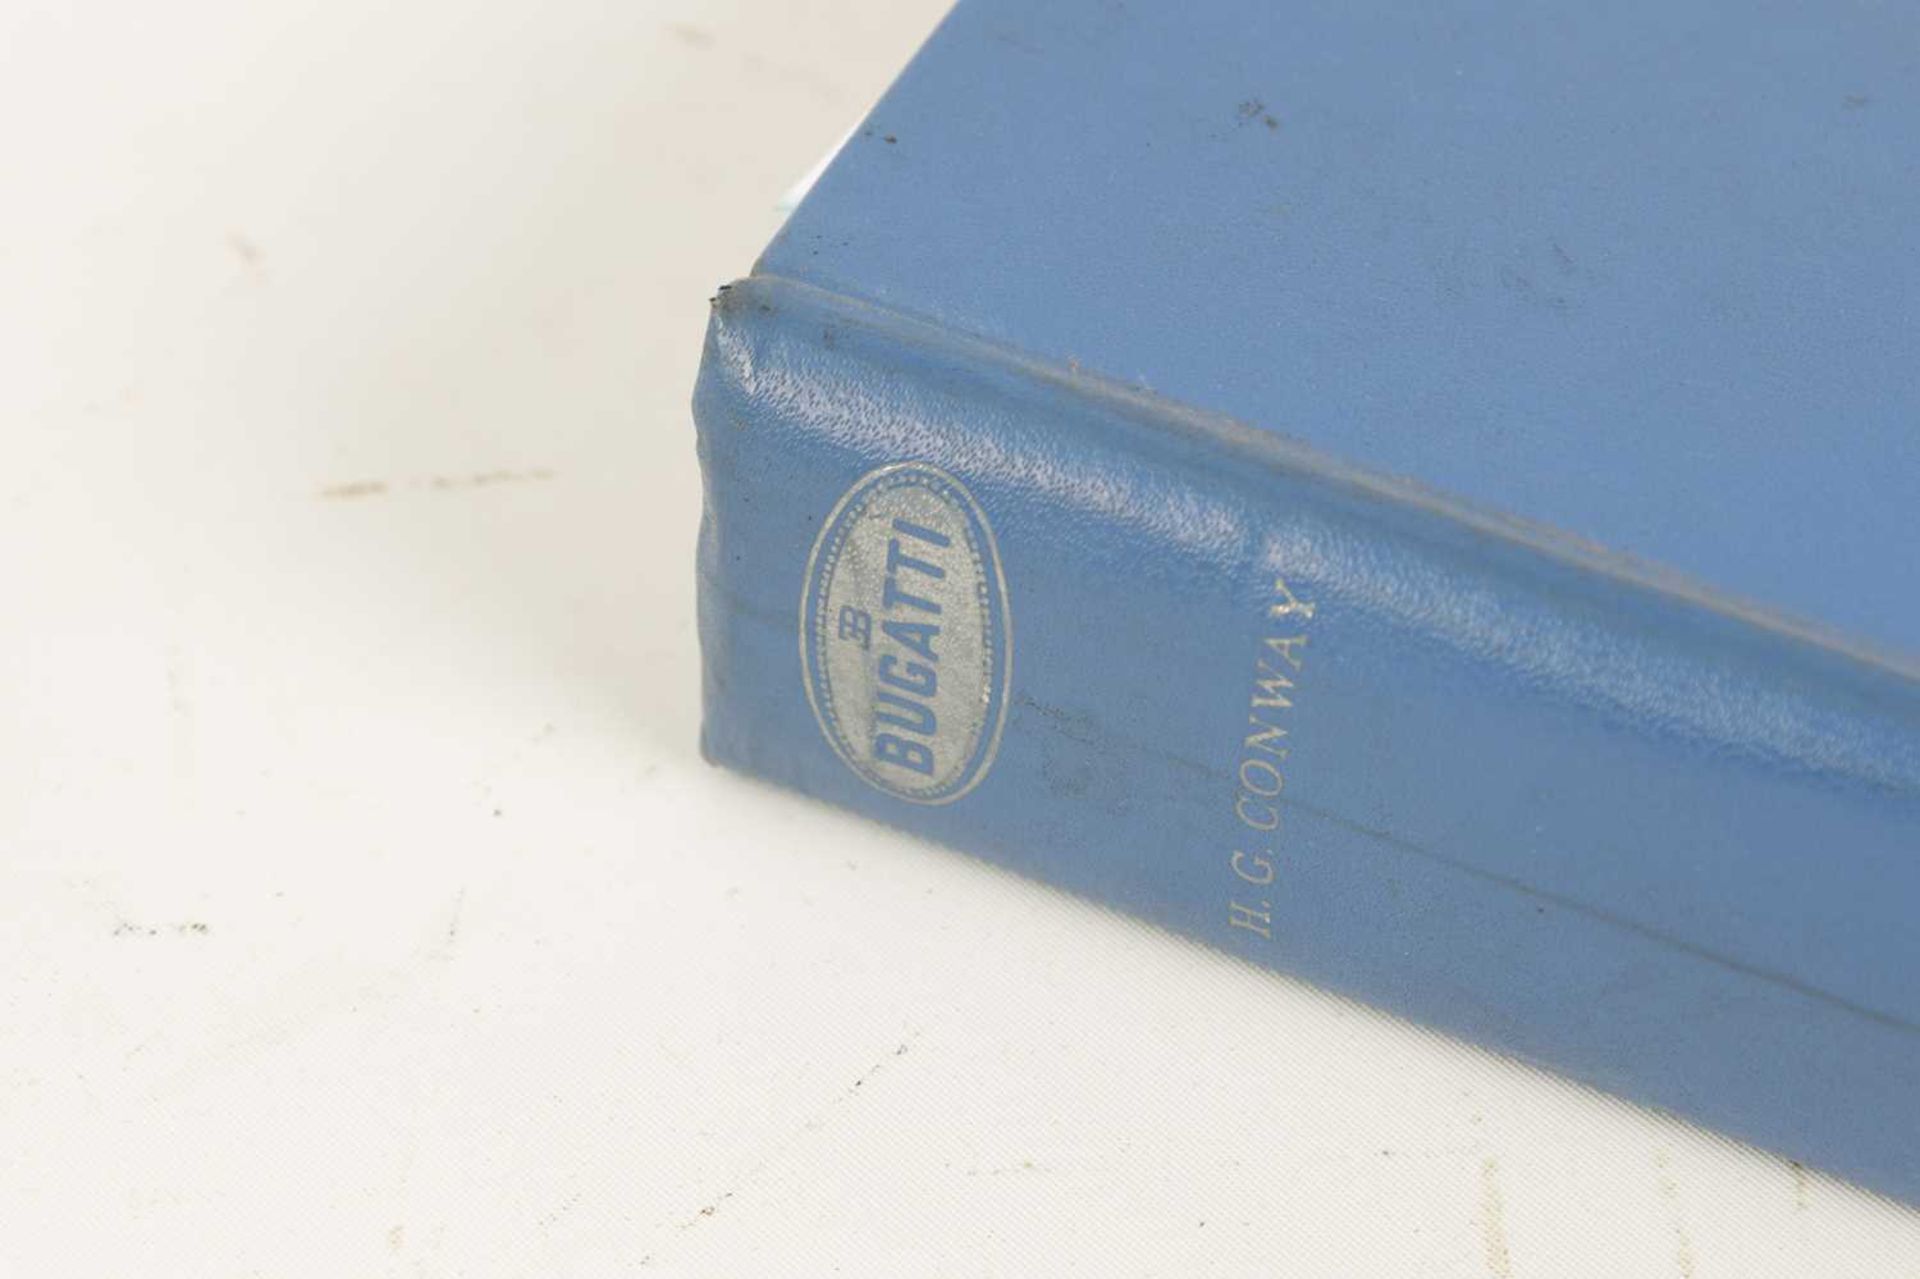 ‘BUGATTI’ FIRST EDITION HARDBACK BY H.G. CONWAY - Image 3 of 8